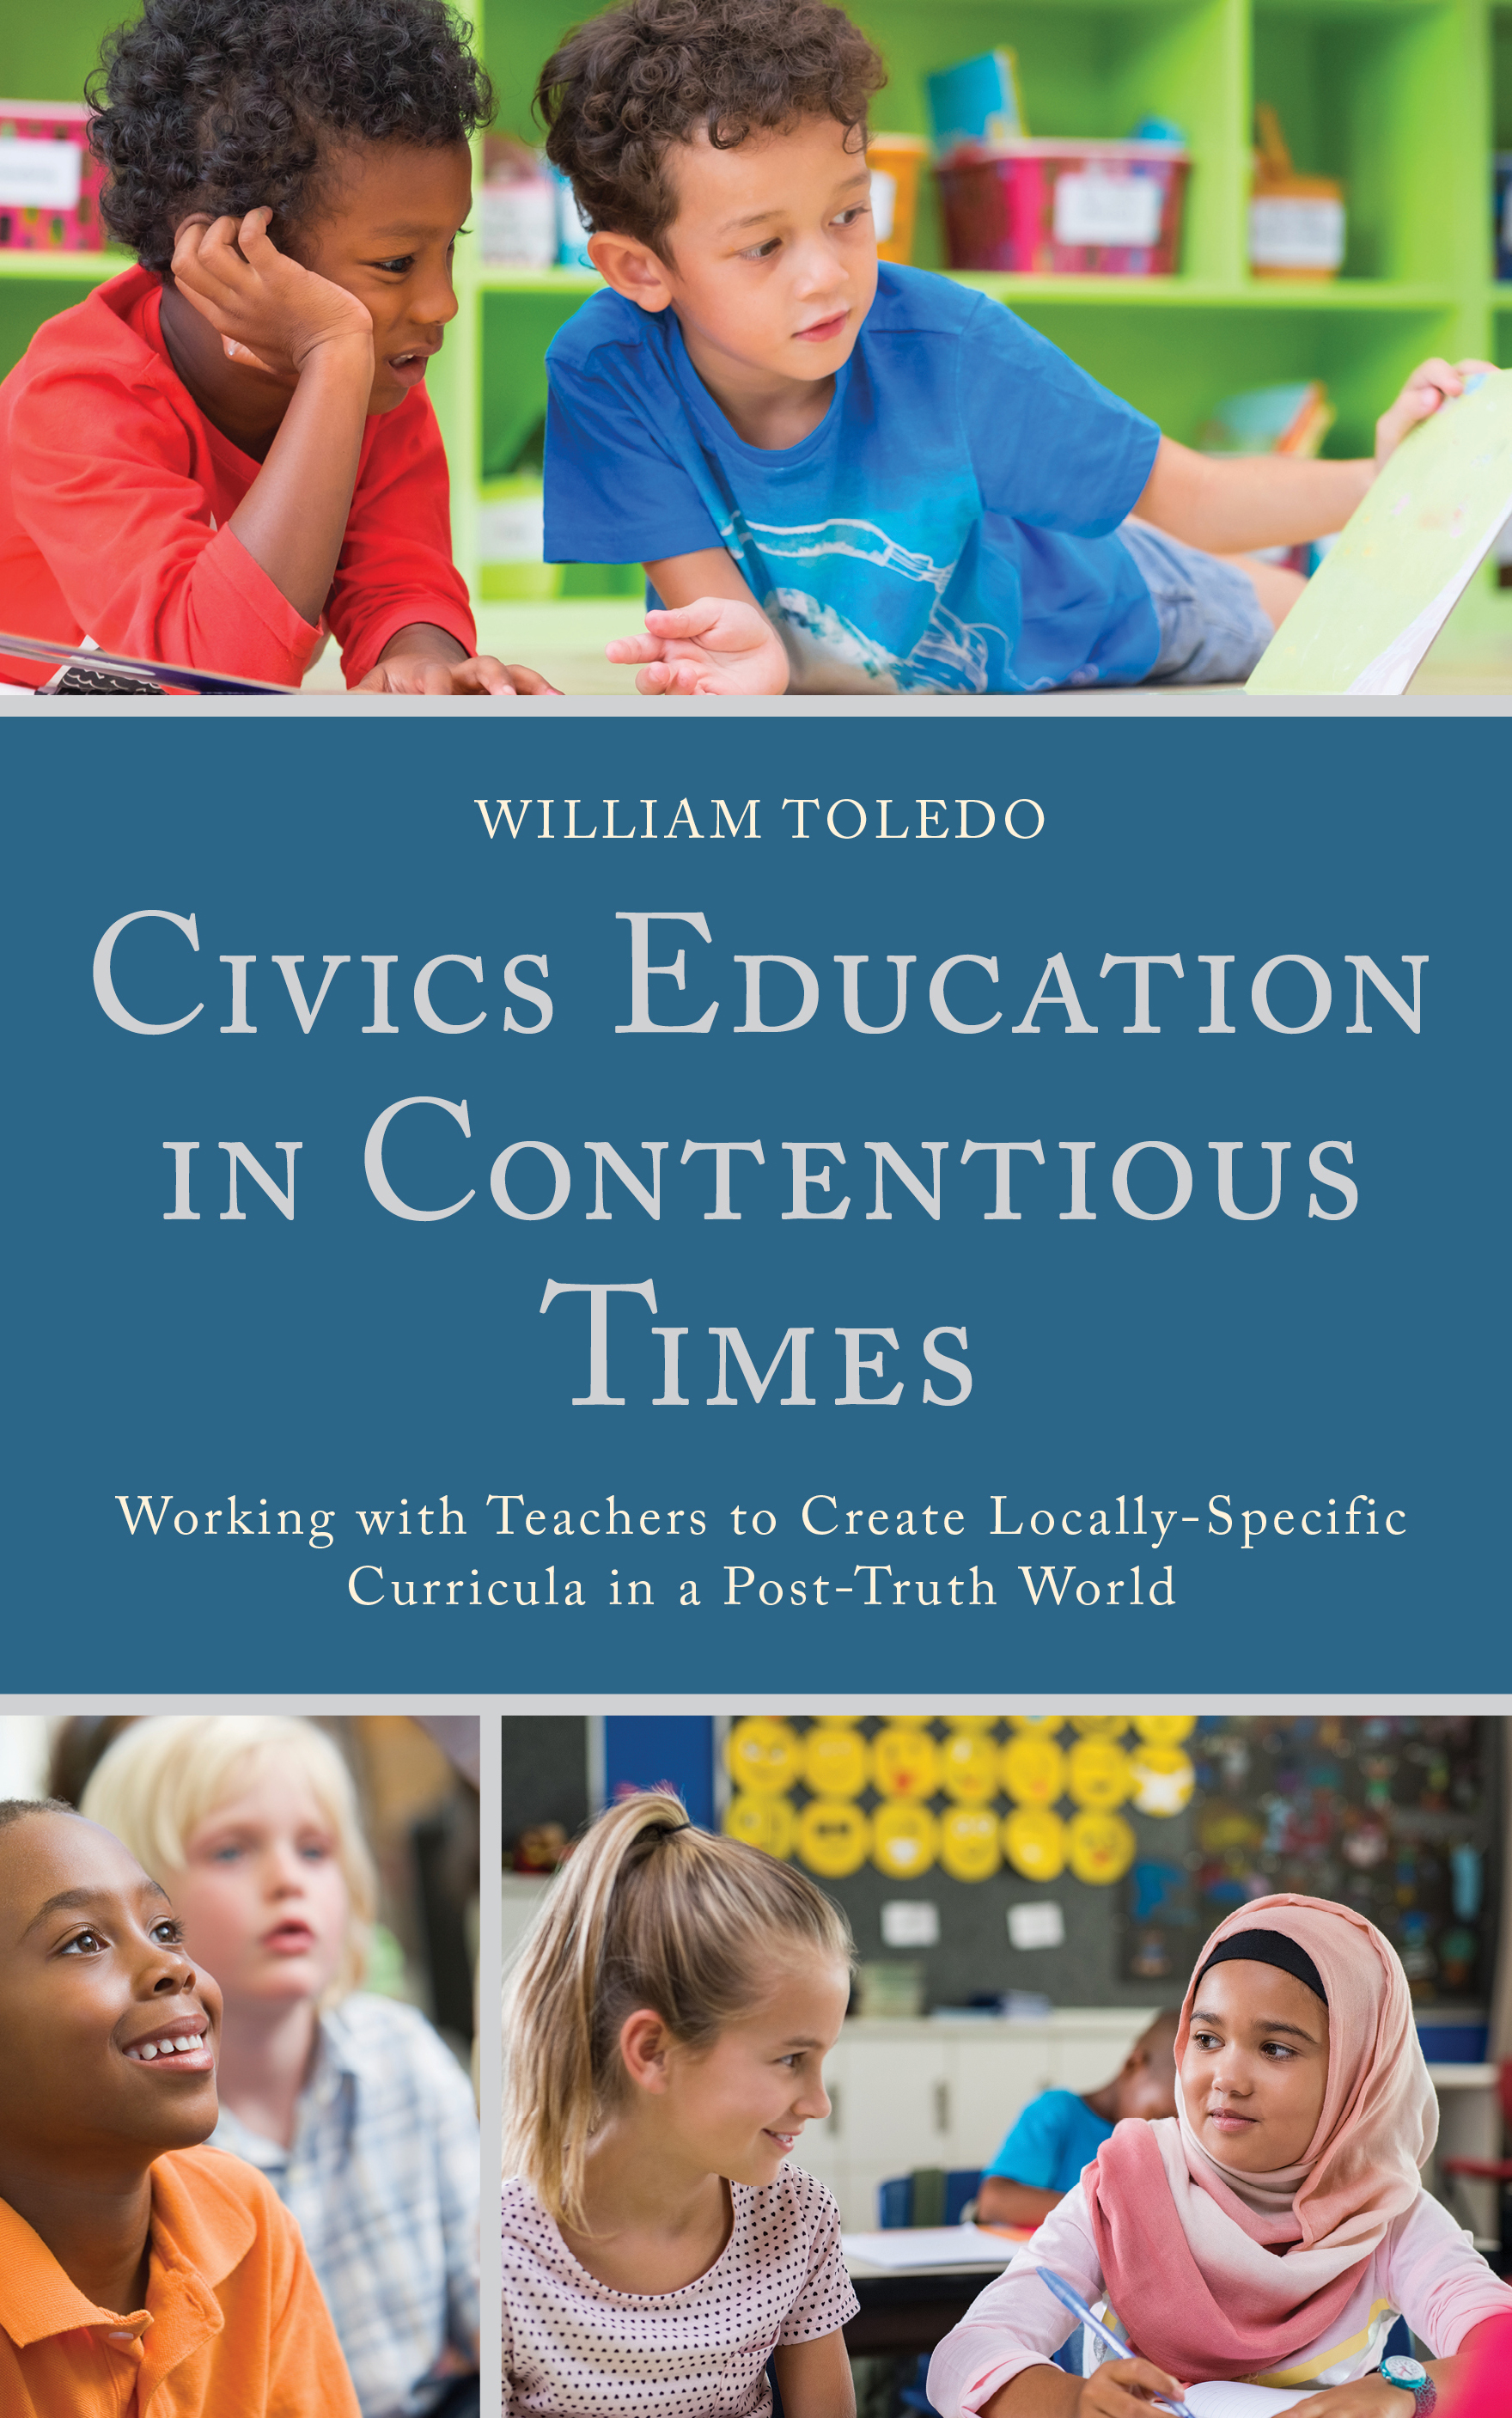 Civics Education in Contentious Times: Working with Teachers to Create Locally-Specific Curricula in a Post-Truth World